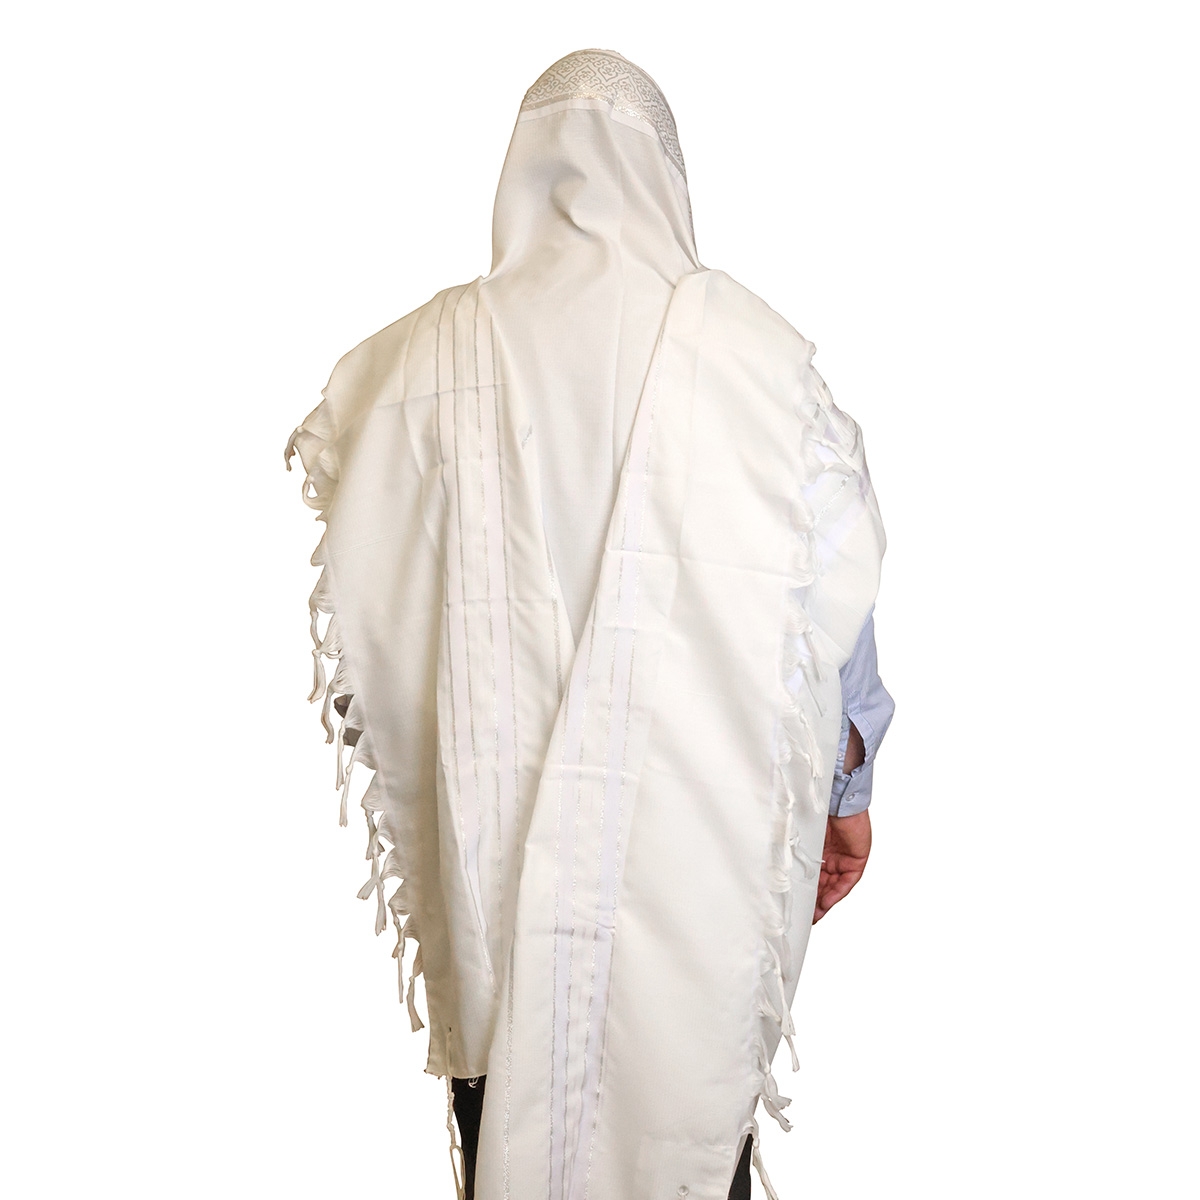 White Acrylic Tallit (Prayer Shawl) with Silver Stripes and Baroque-Pattern Collar - 1